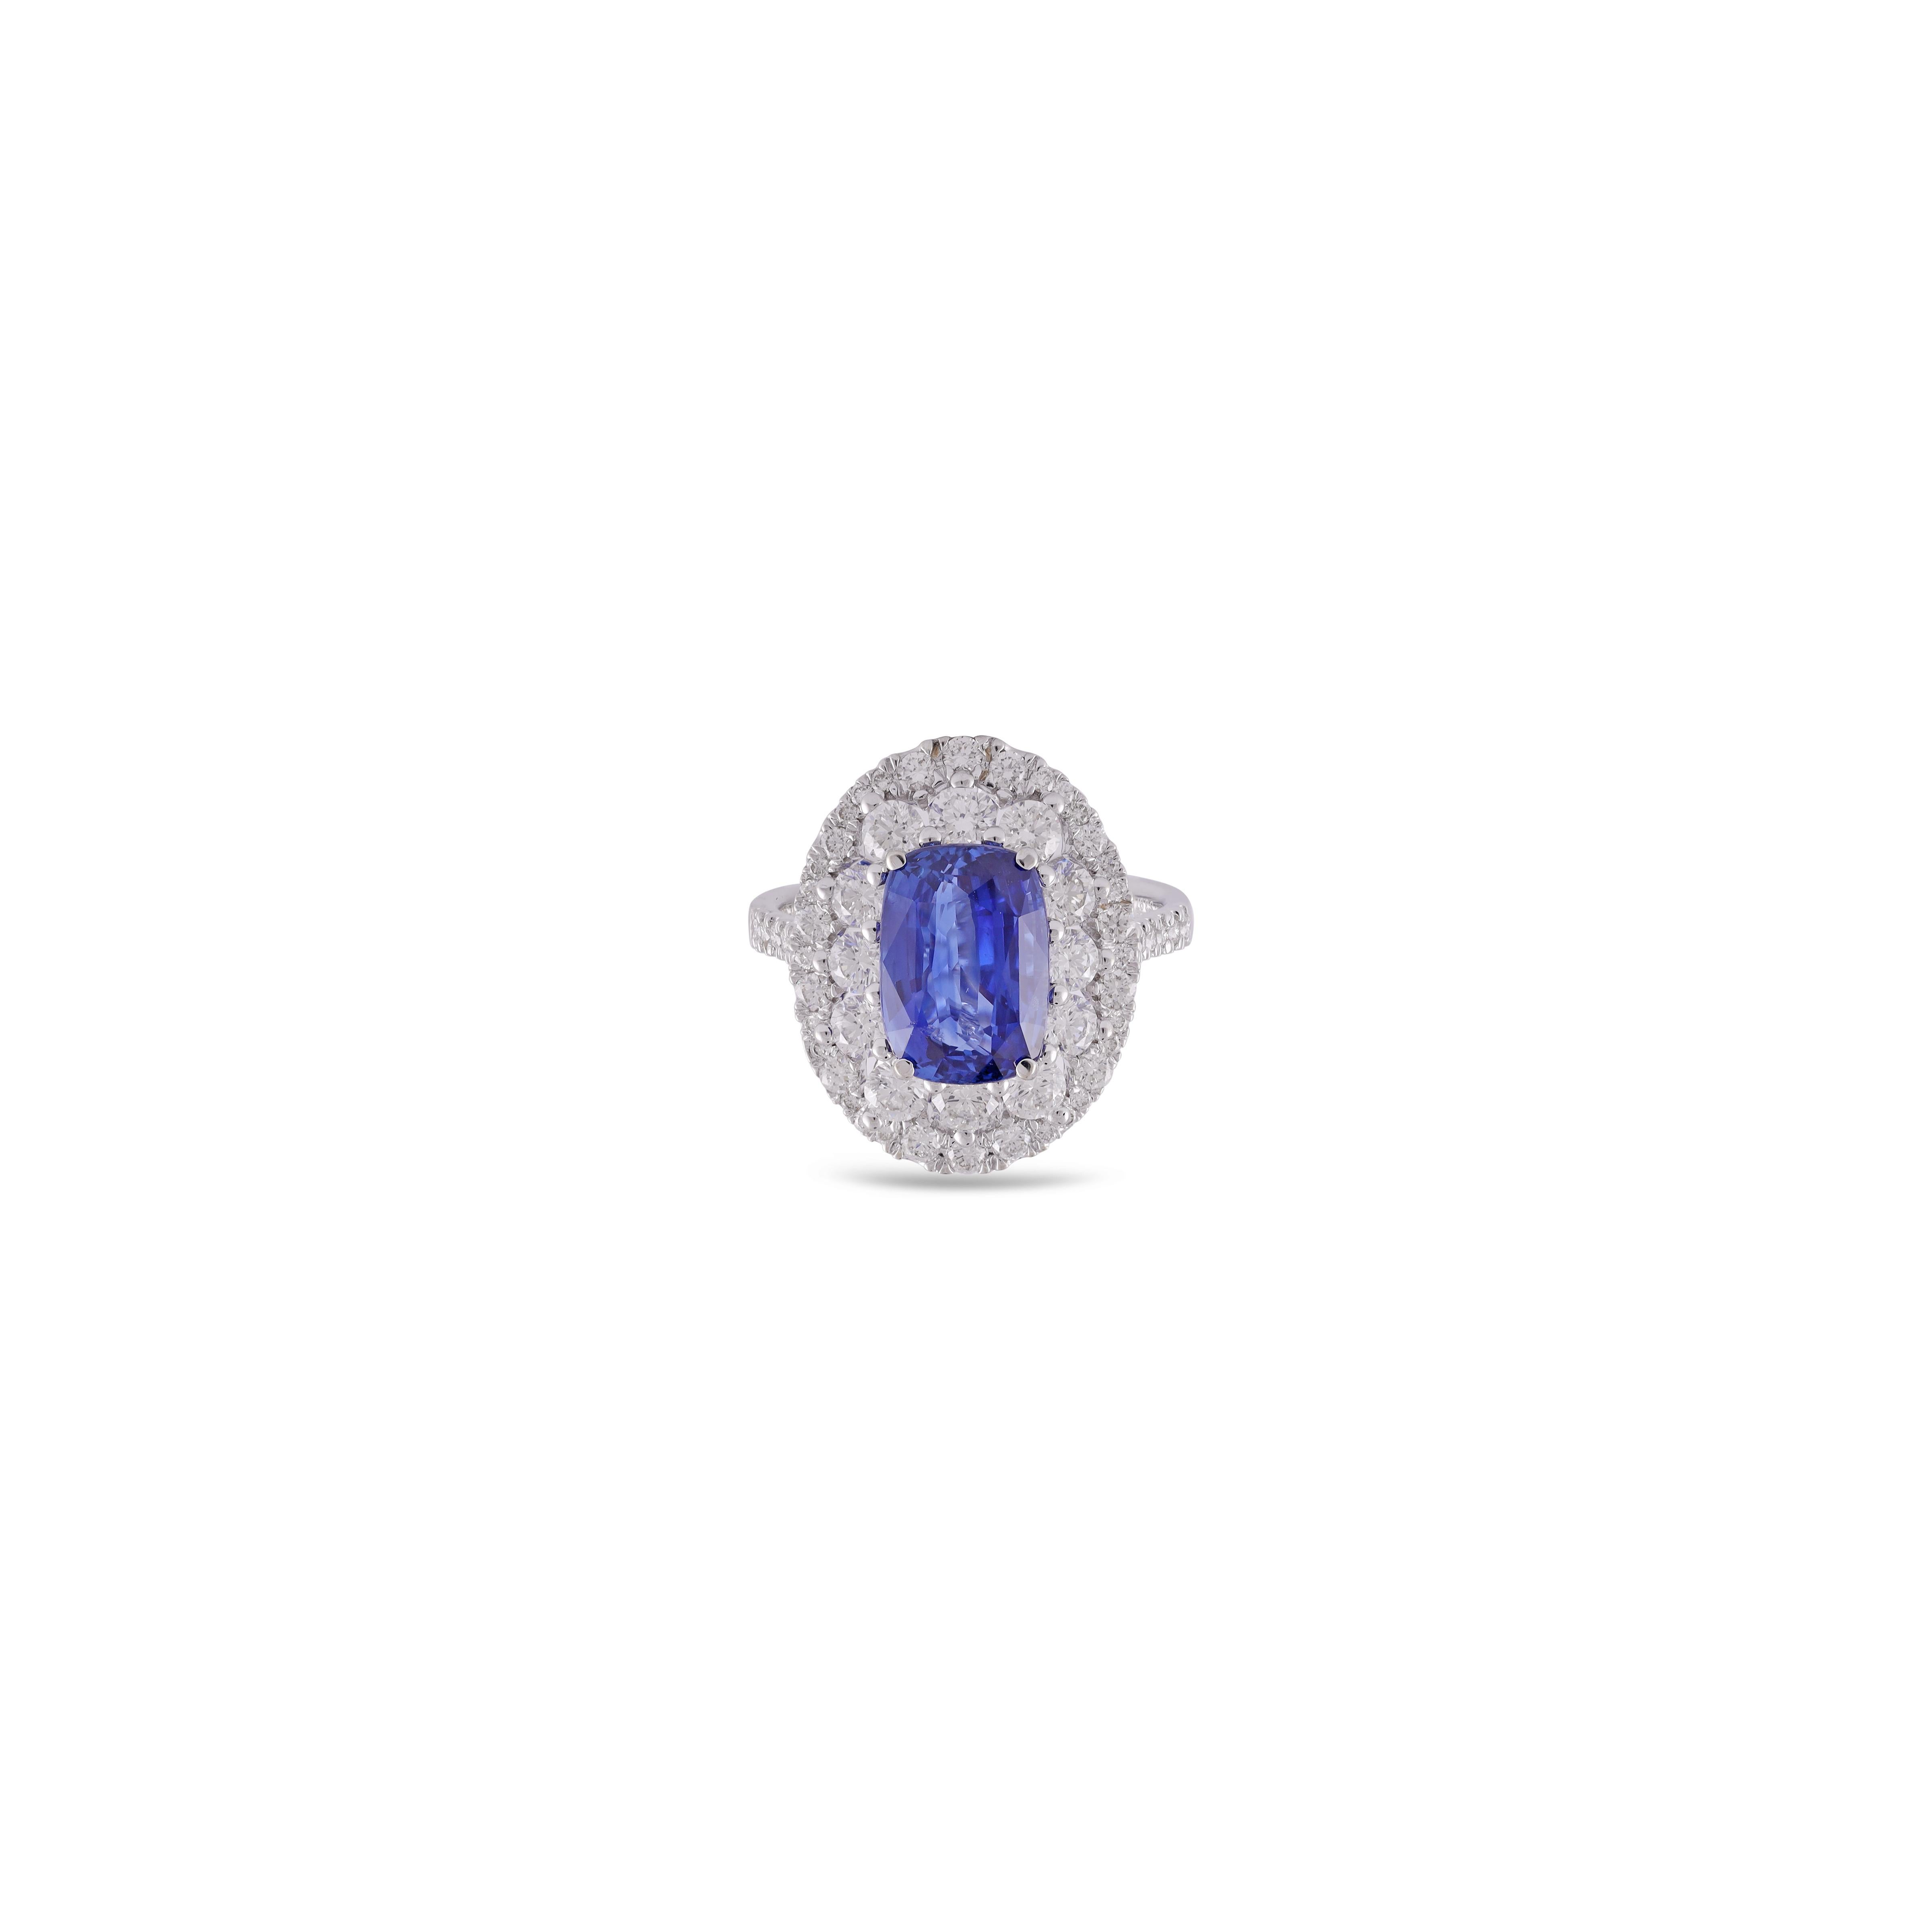 Its an exclusive Sapphire & diamond ring studded in 18k White gold with 1 piece of Sapphire weight 3.97 carat with 60 pieces of diamonds weight 1.60 carat this entire ring is studded in 18k White gold , ring size can be change as per the